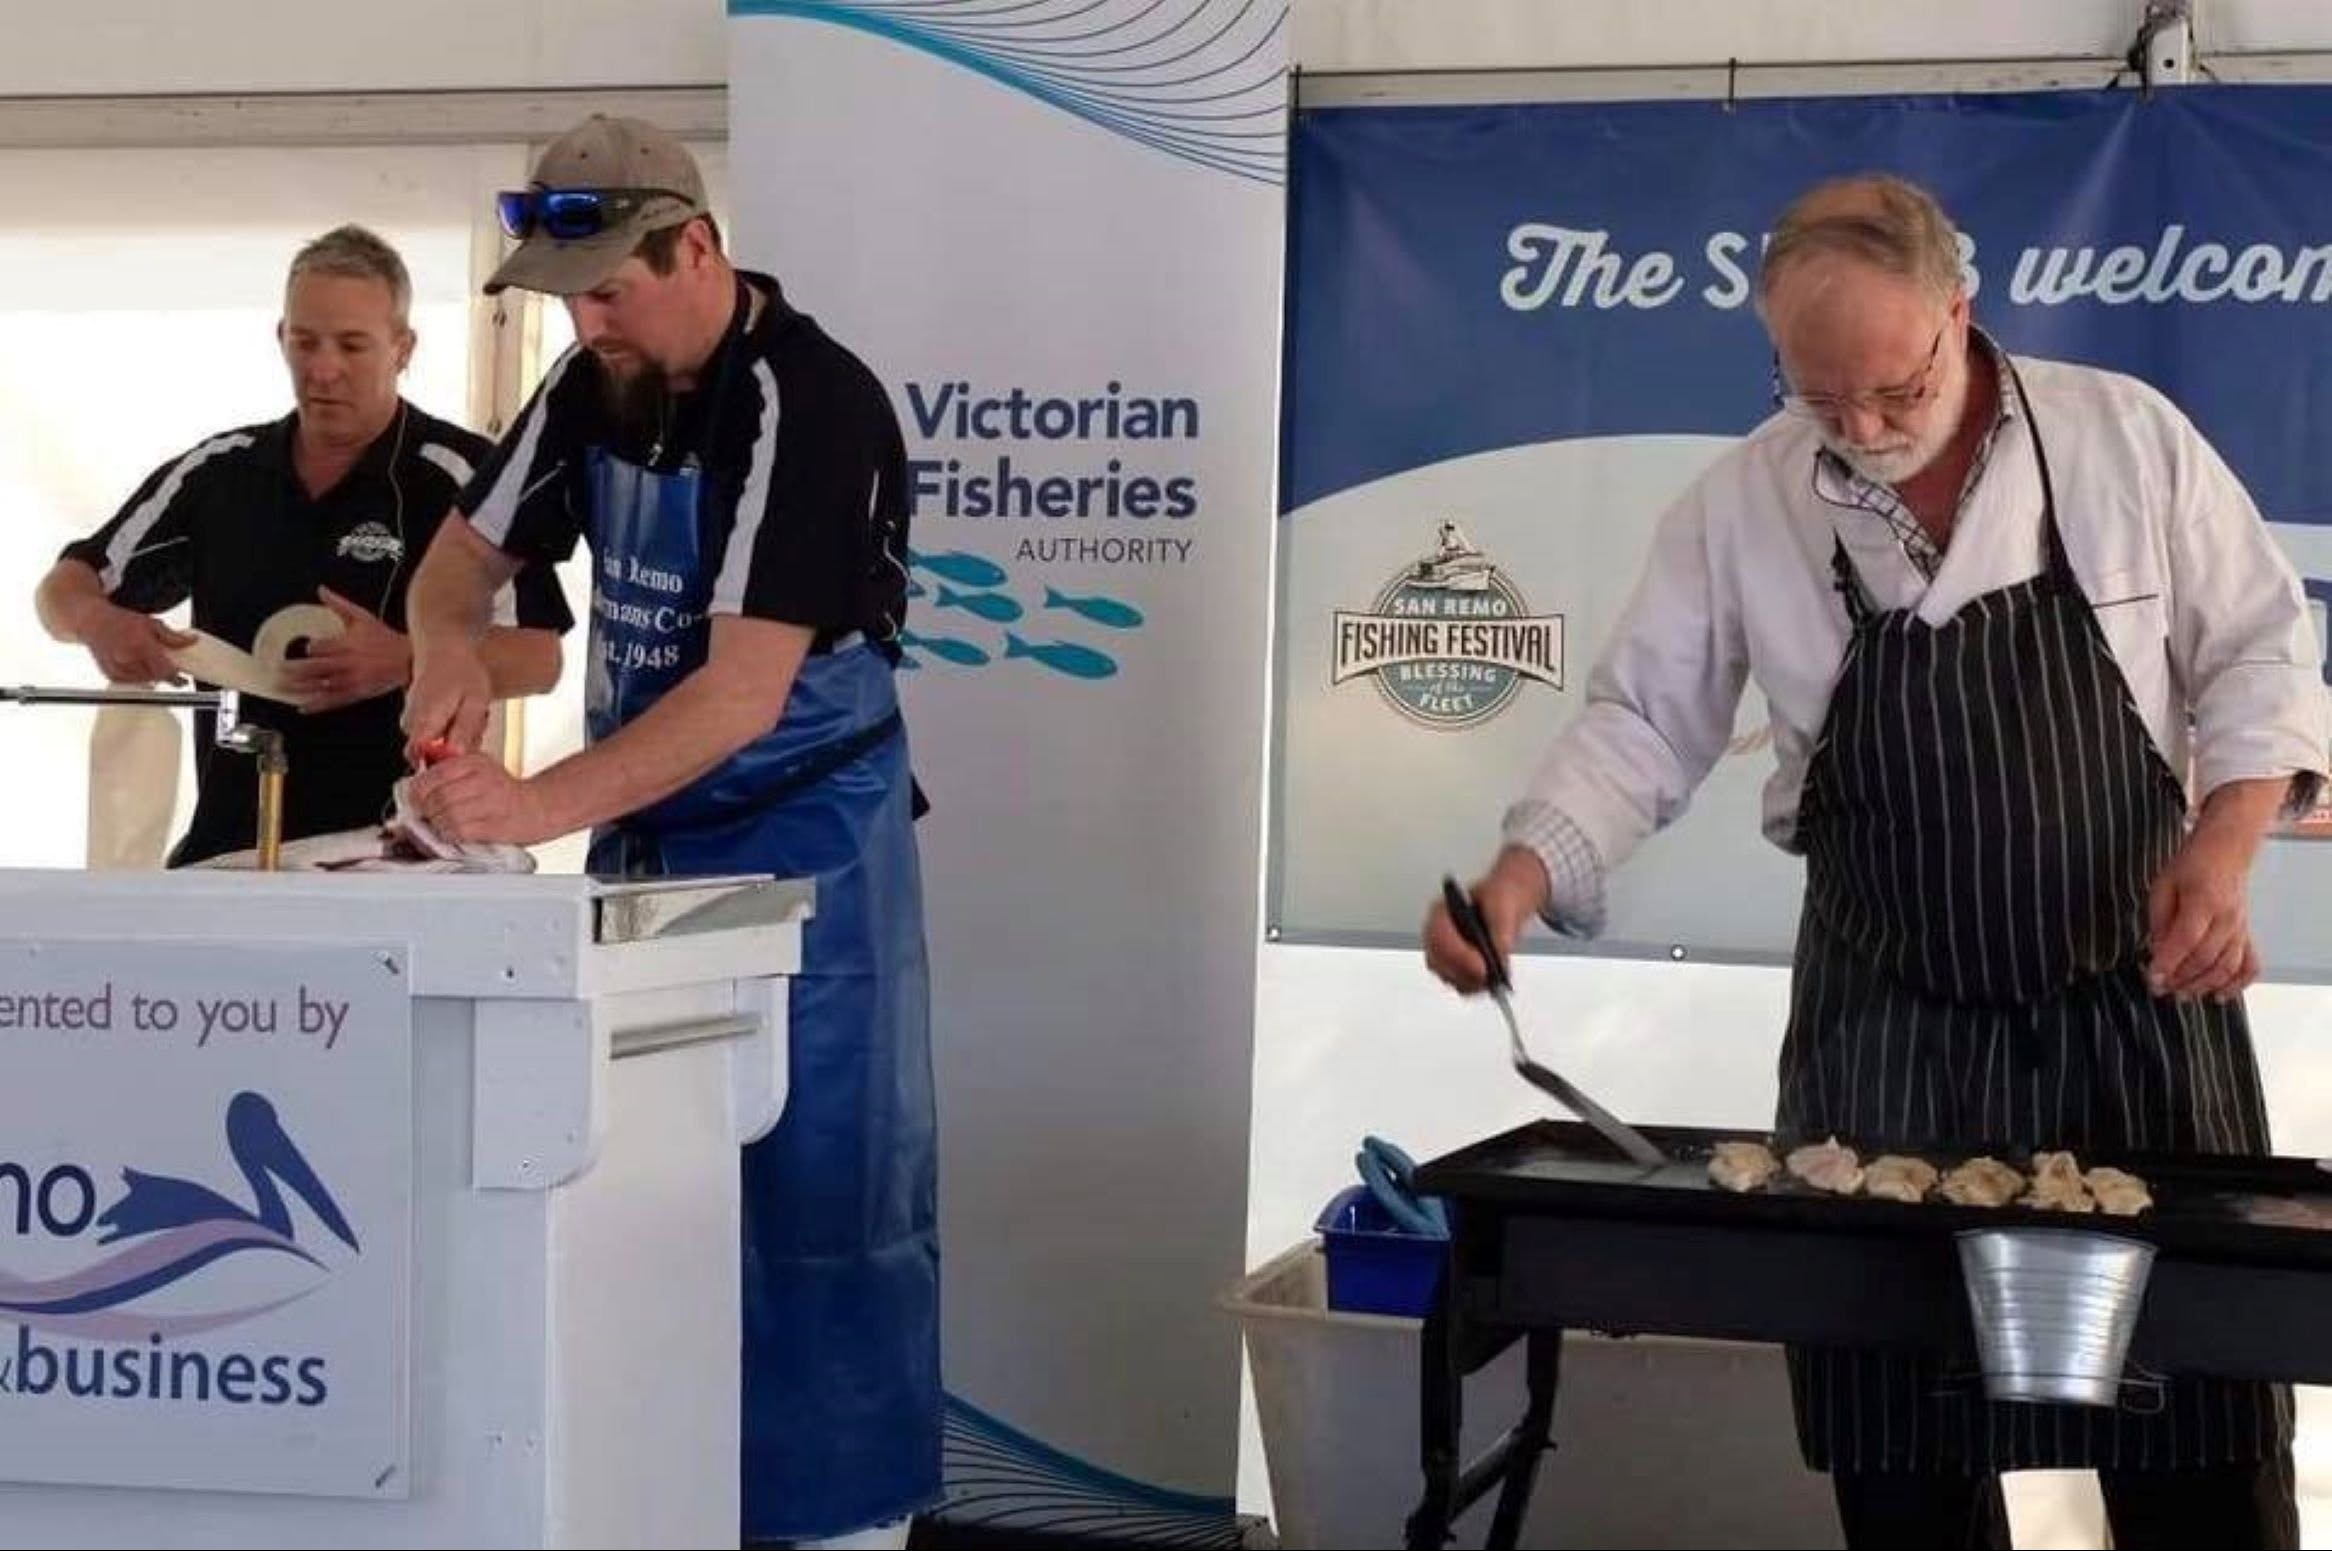 San Remo Fishing Festival - Townsville Tourism